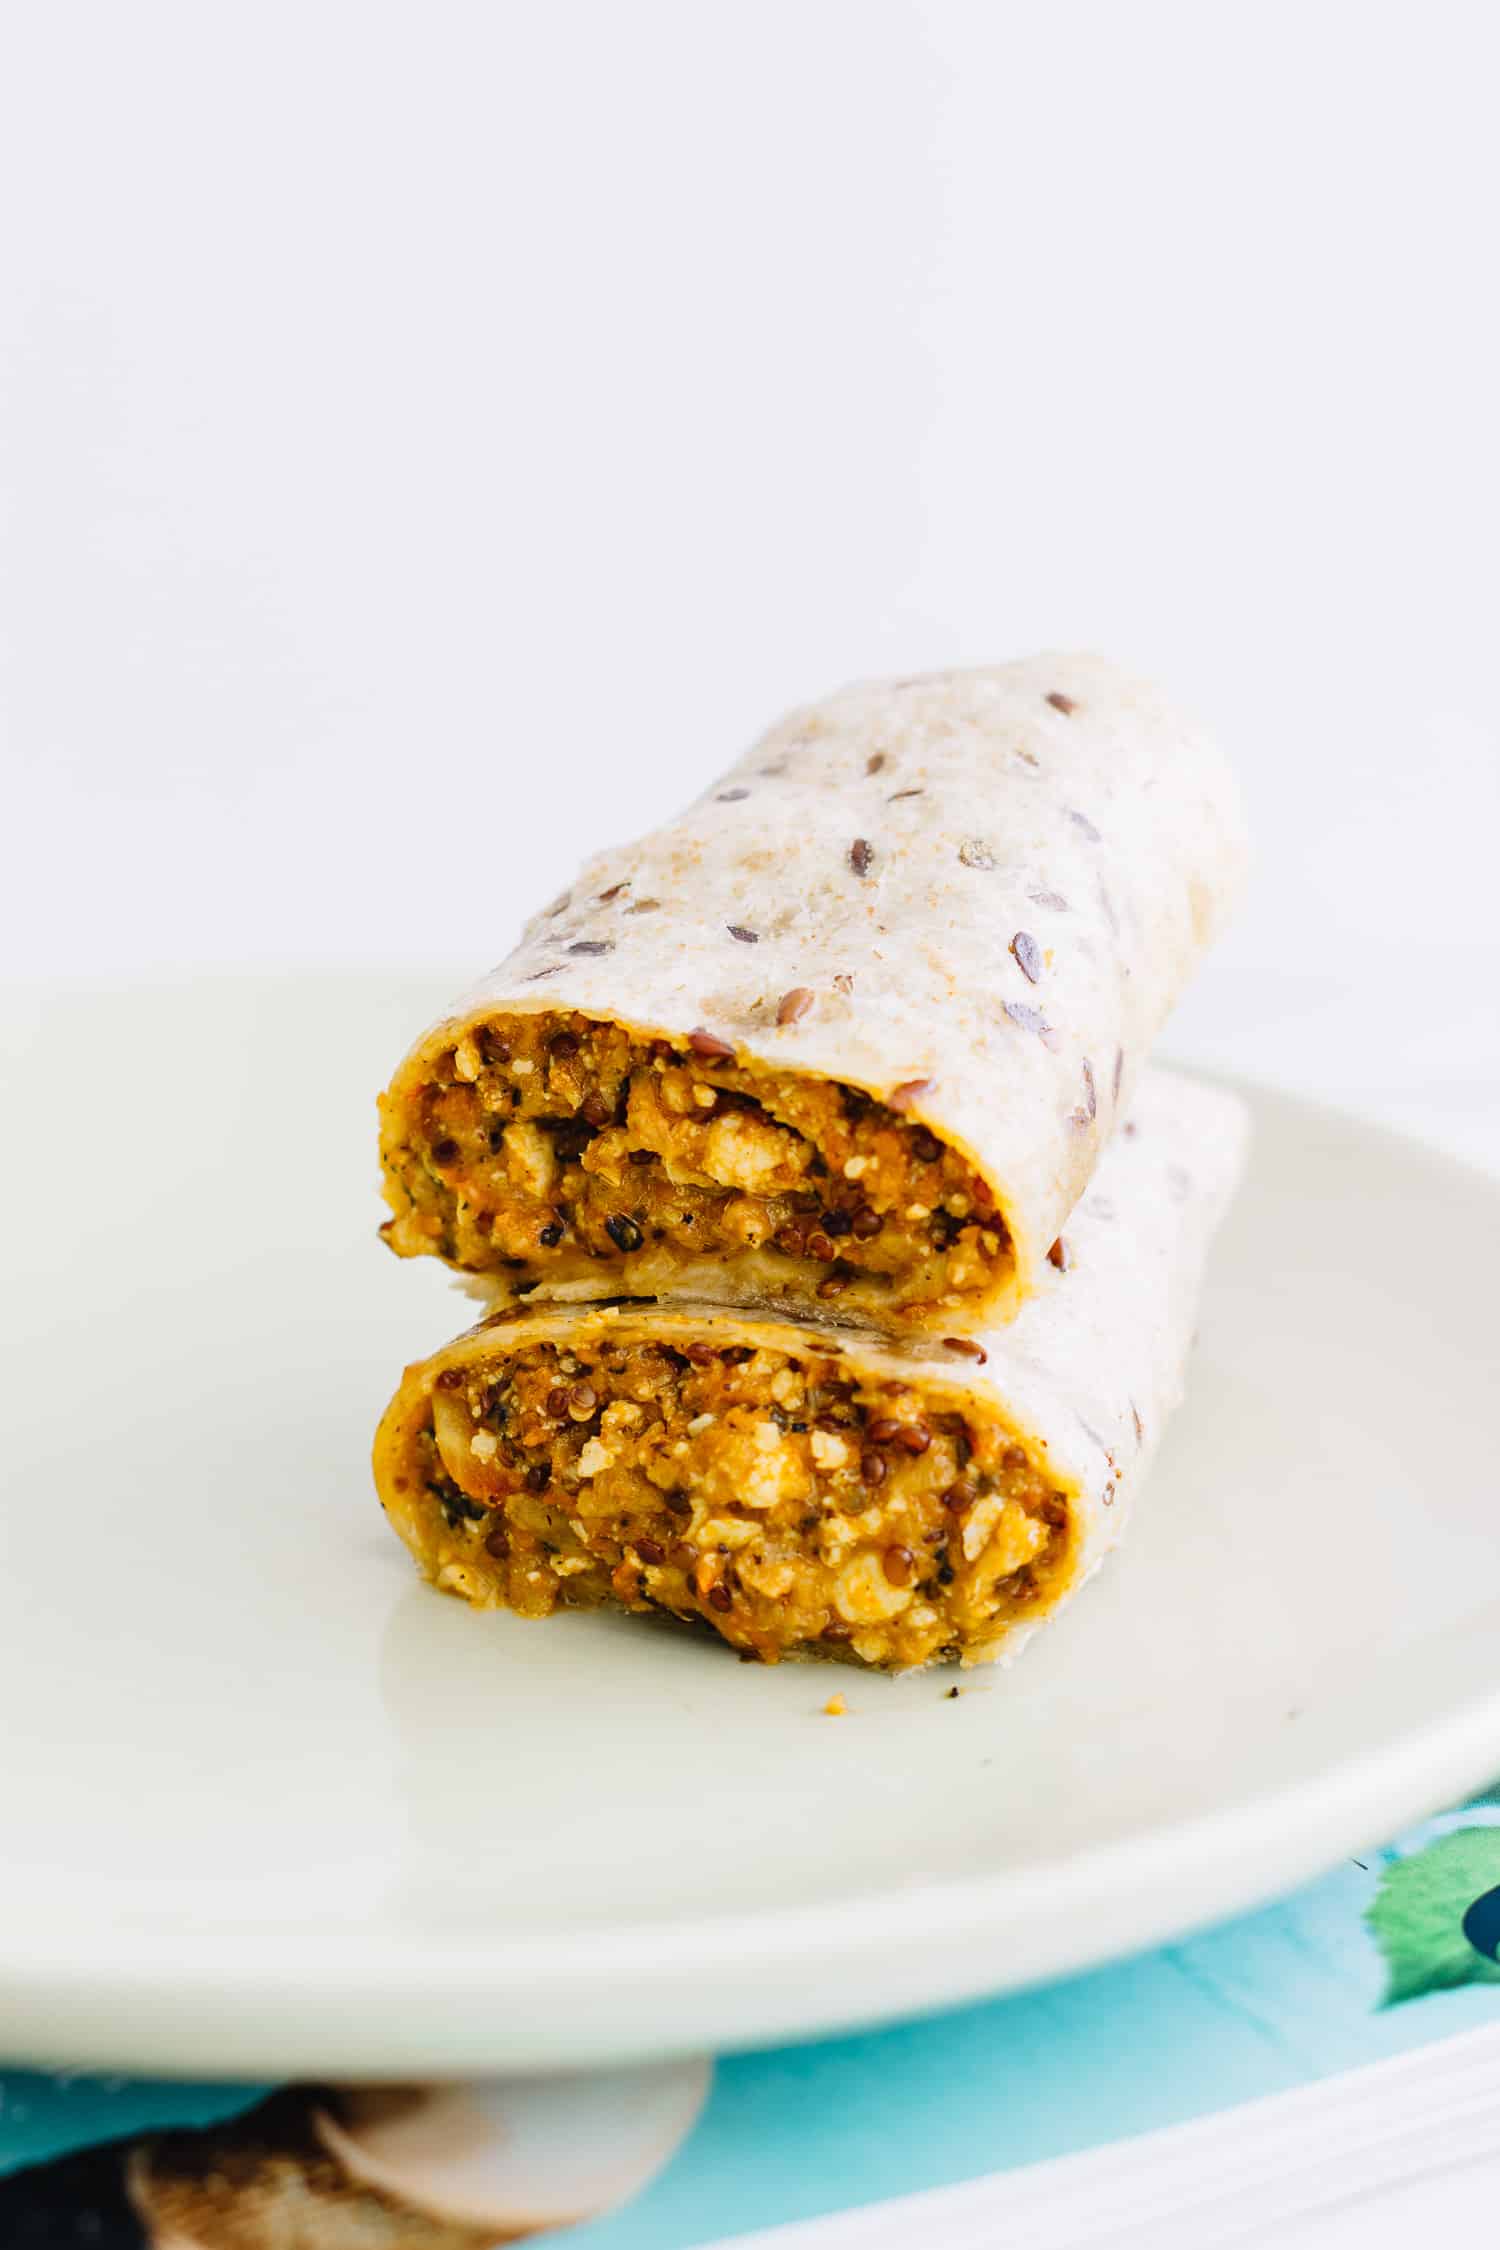 Tasty Breakfast Burritos to Add to Your Healthy Meal Plan